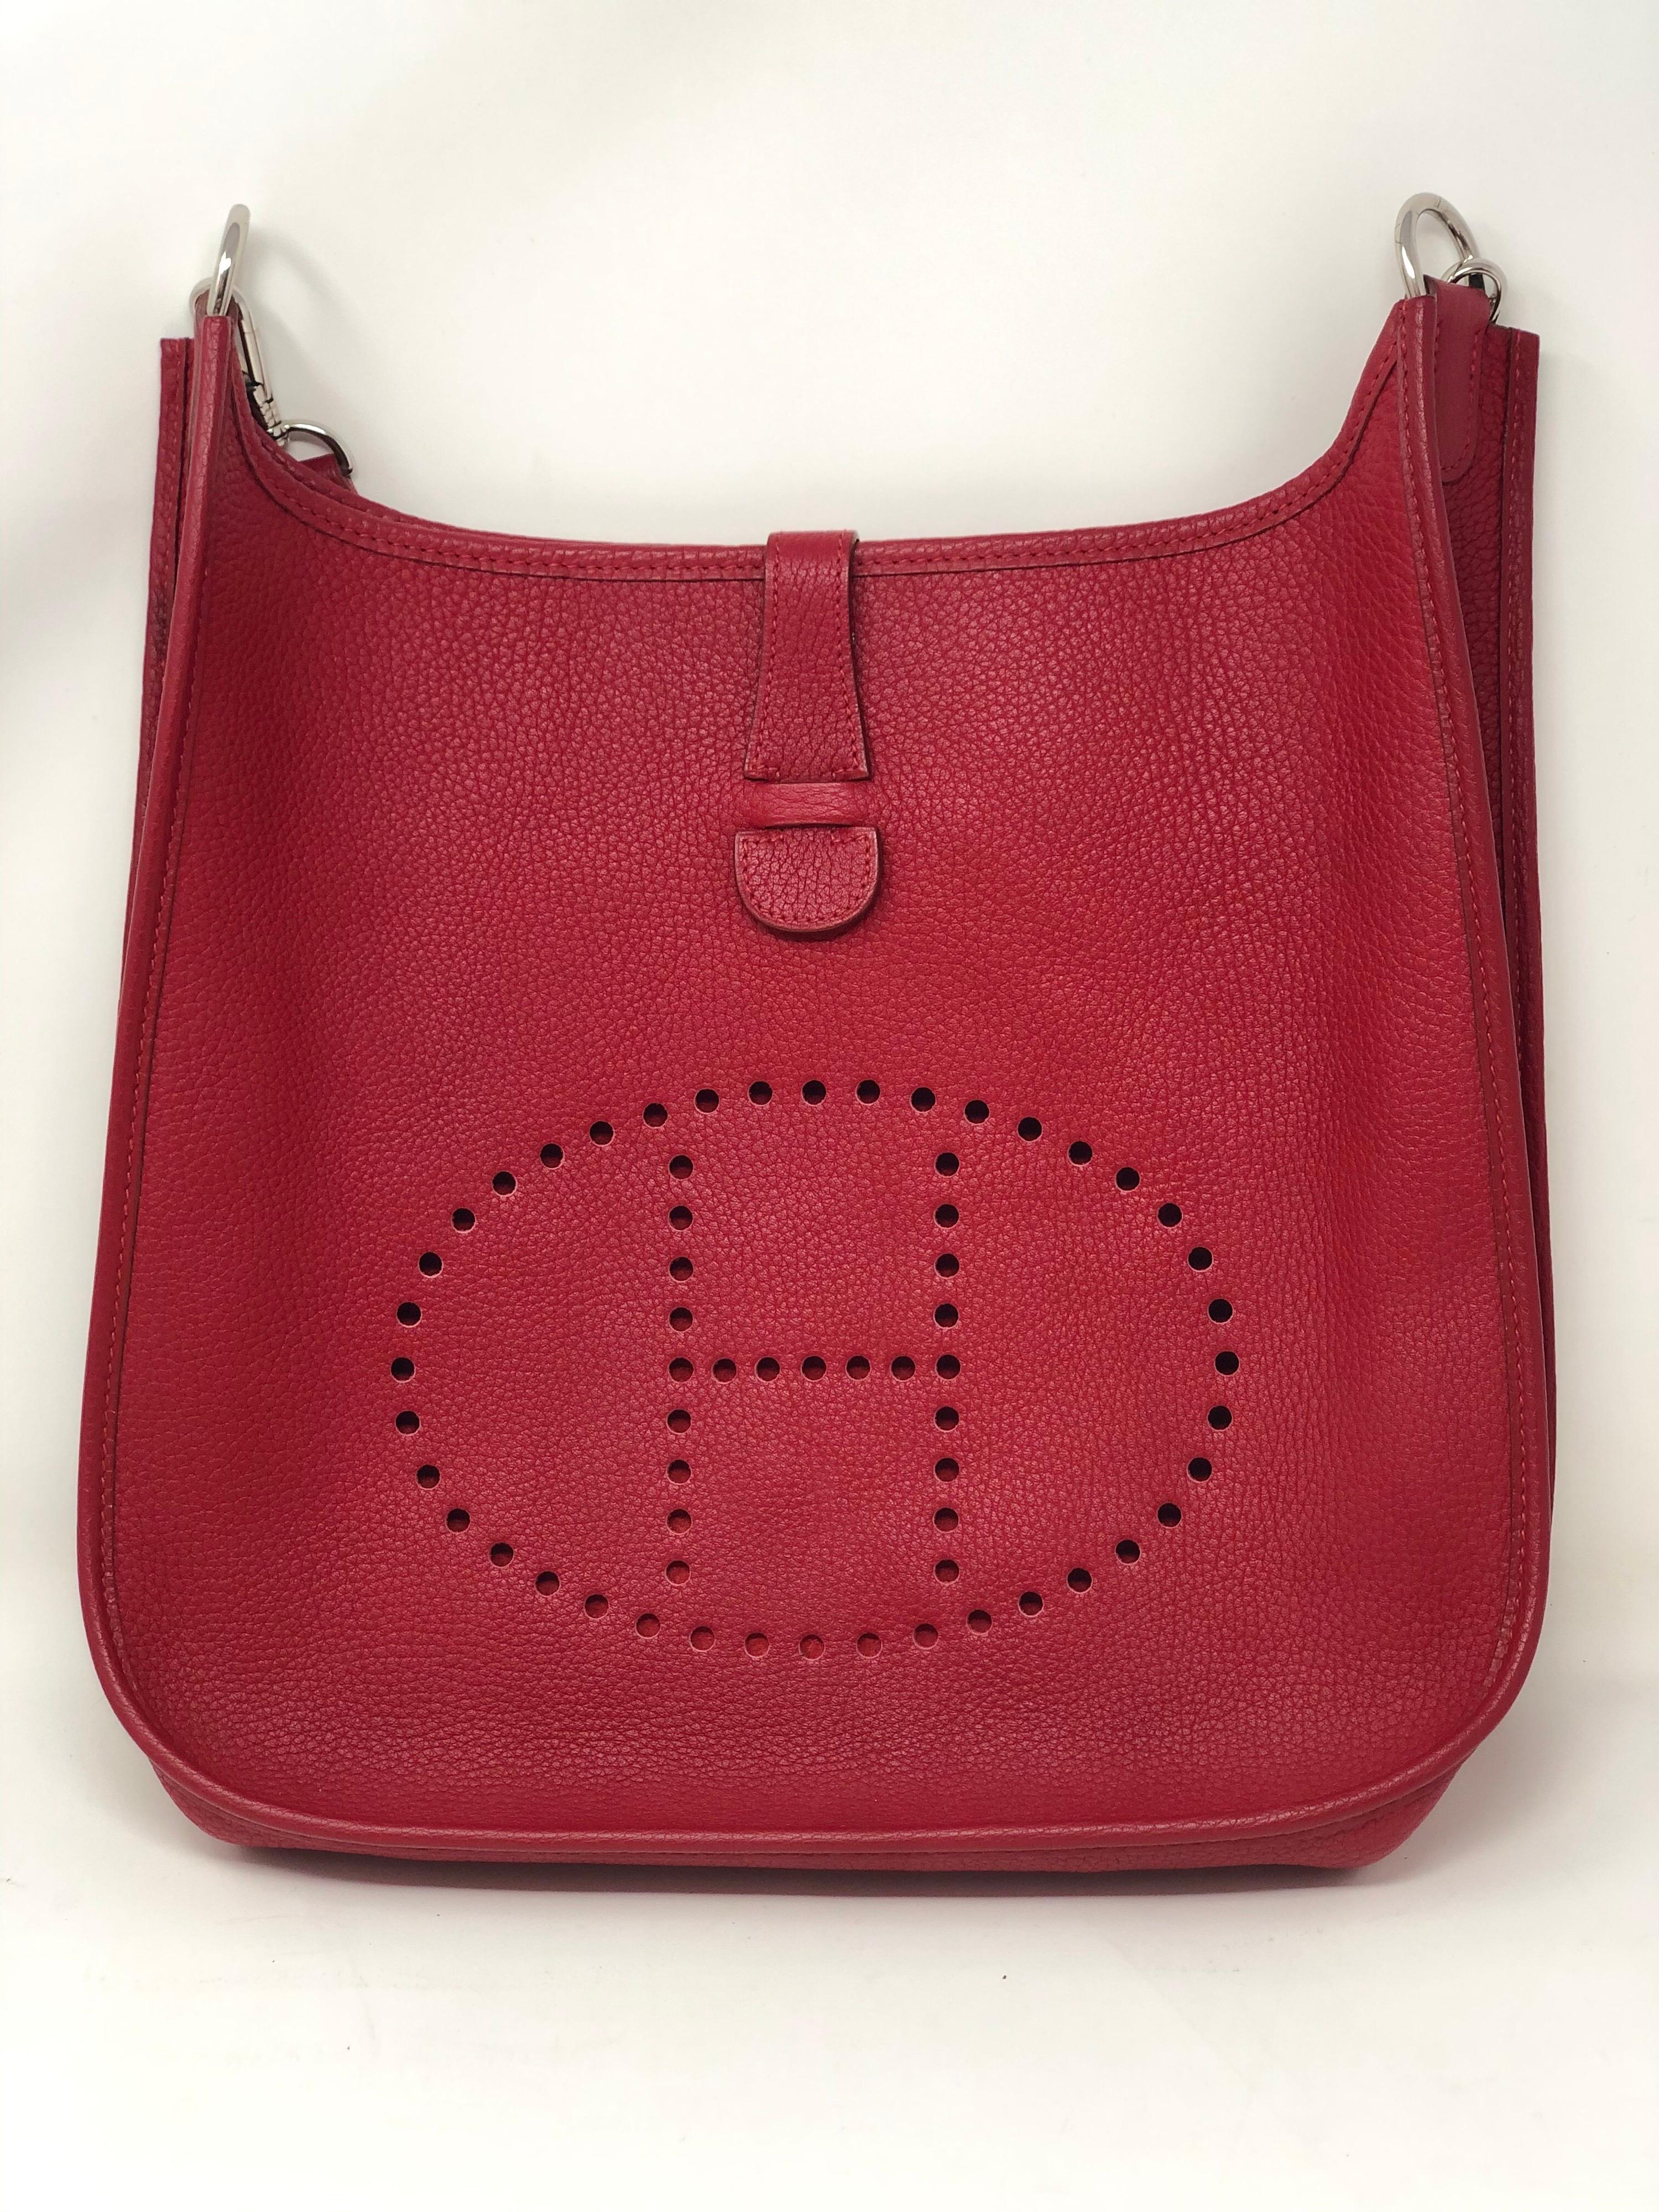 Hermes Red Evelyne Bag. Series One. Vintage Hermes Bag with red strap. GM size. Good condition. Rare and hard to find color. One small darker leather spot on back of bag. Please see photos. Guaranteed authentic. 